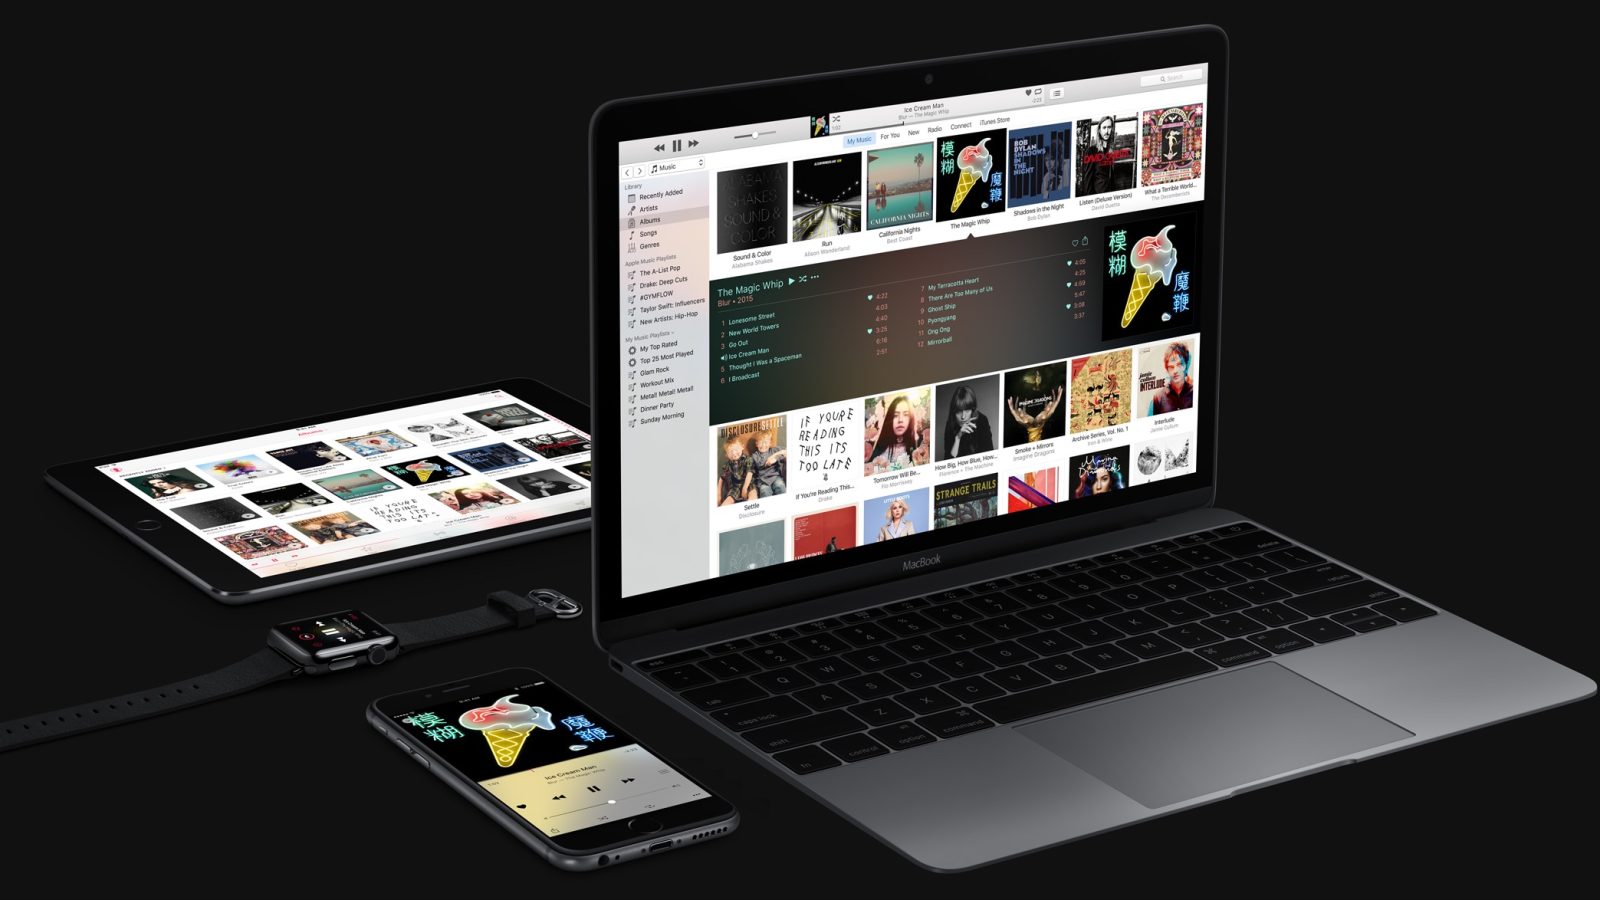 what is the latest version of itunes for macbook pro